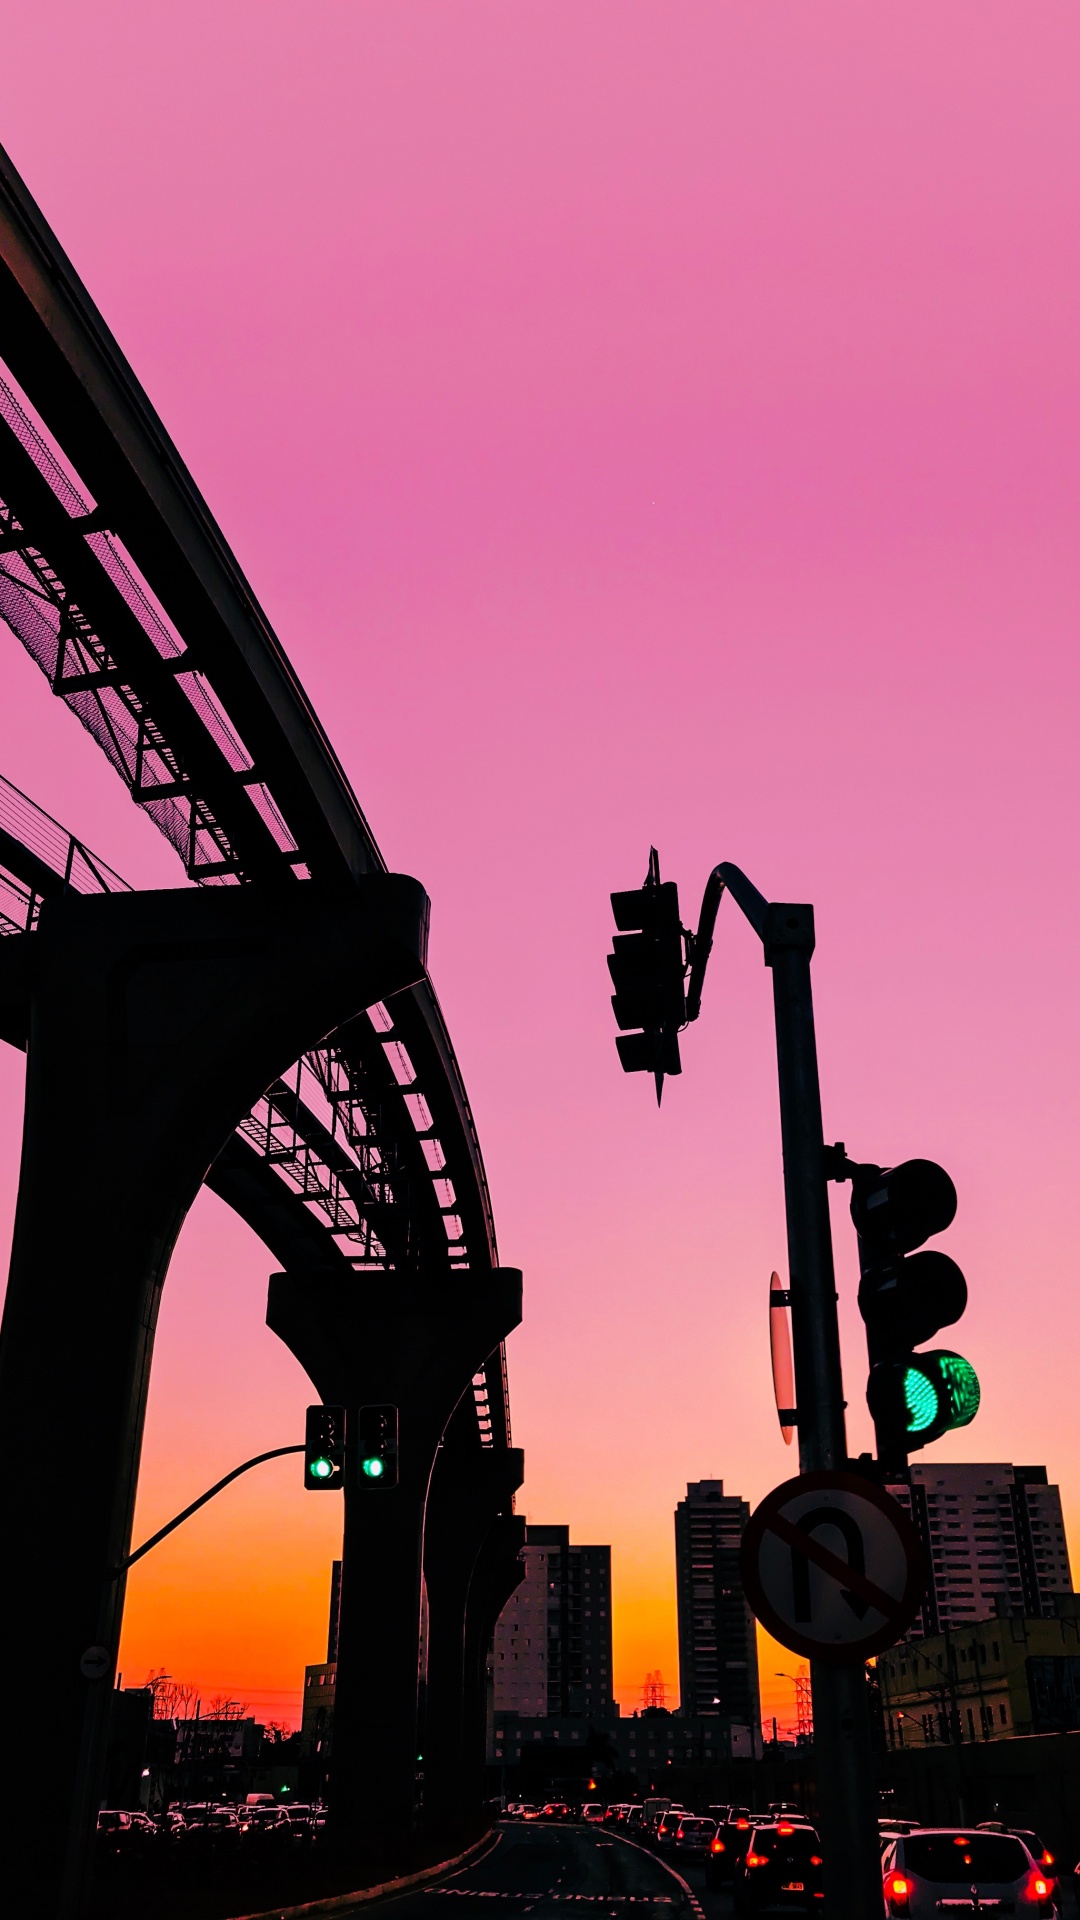 Silhouette of Bridge During Sunset. Wallpaper in 1080x1920 Resolution